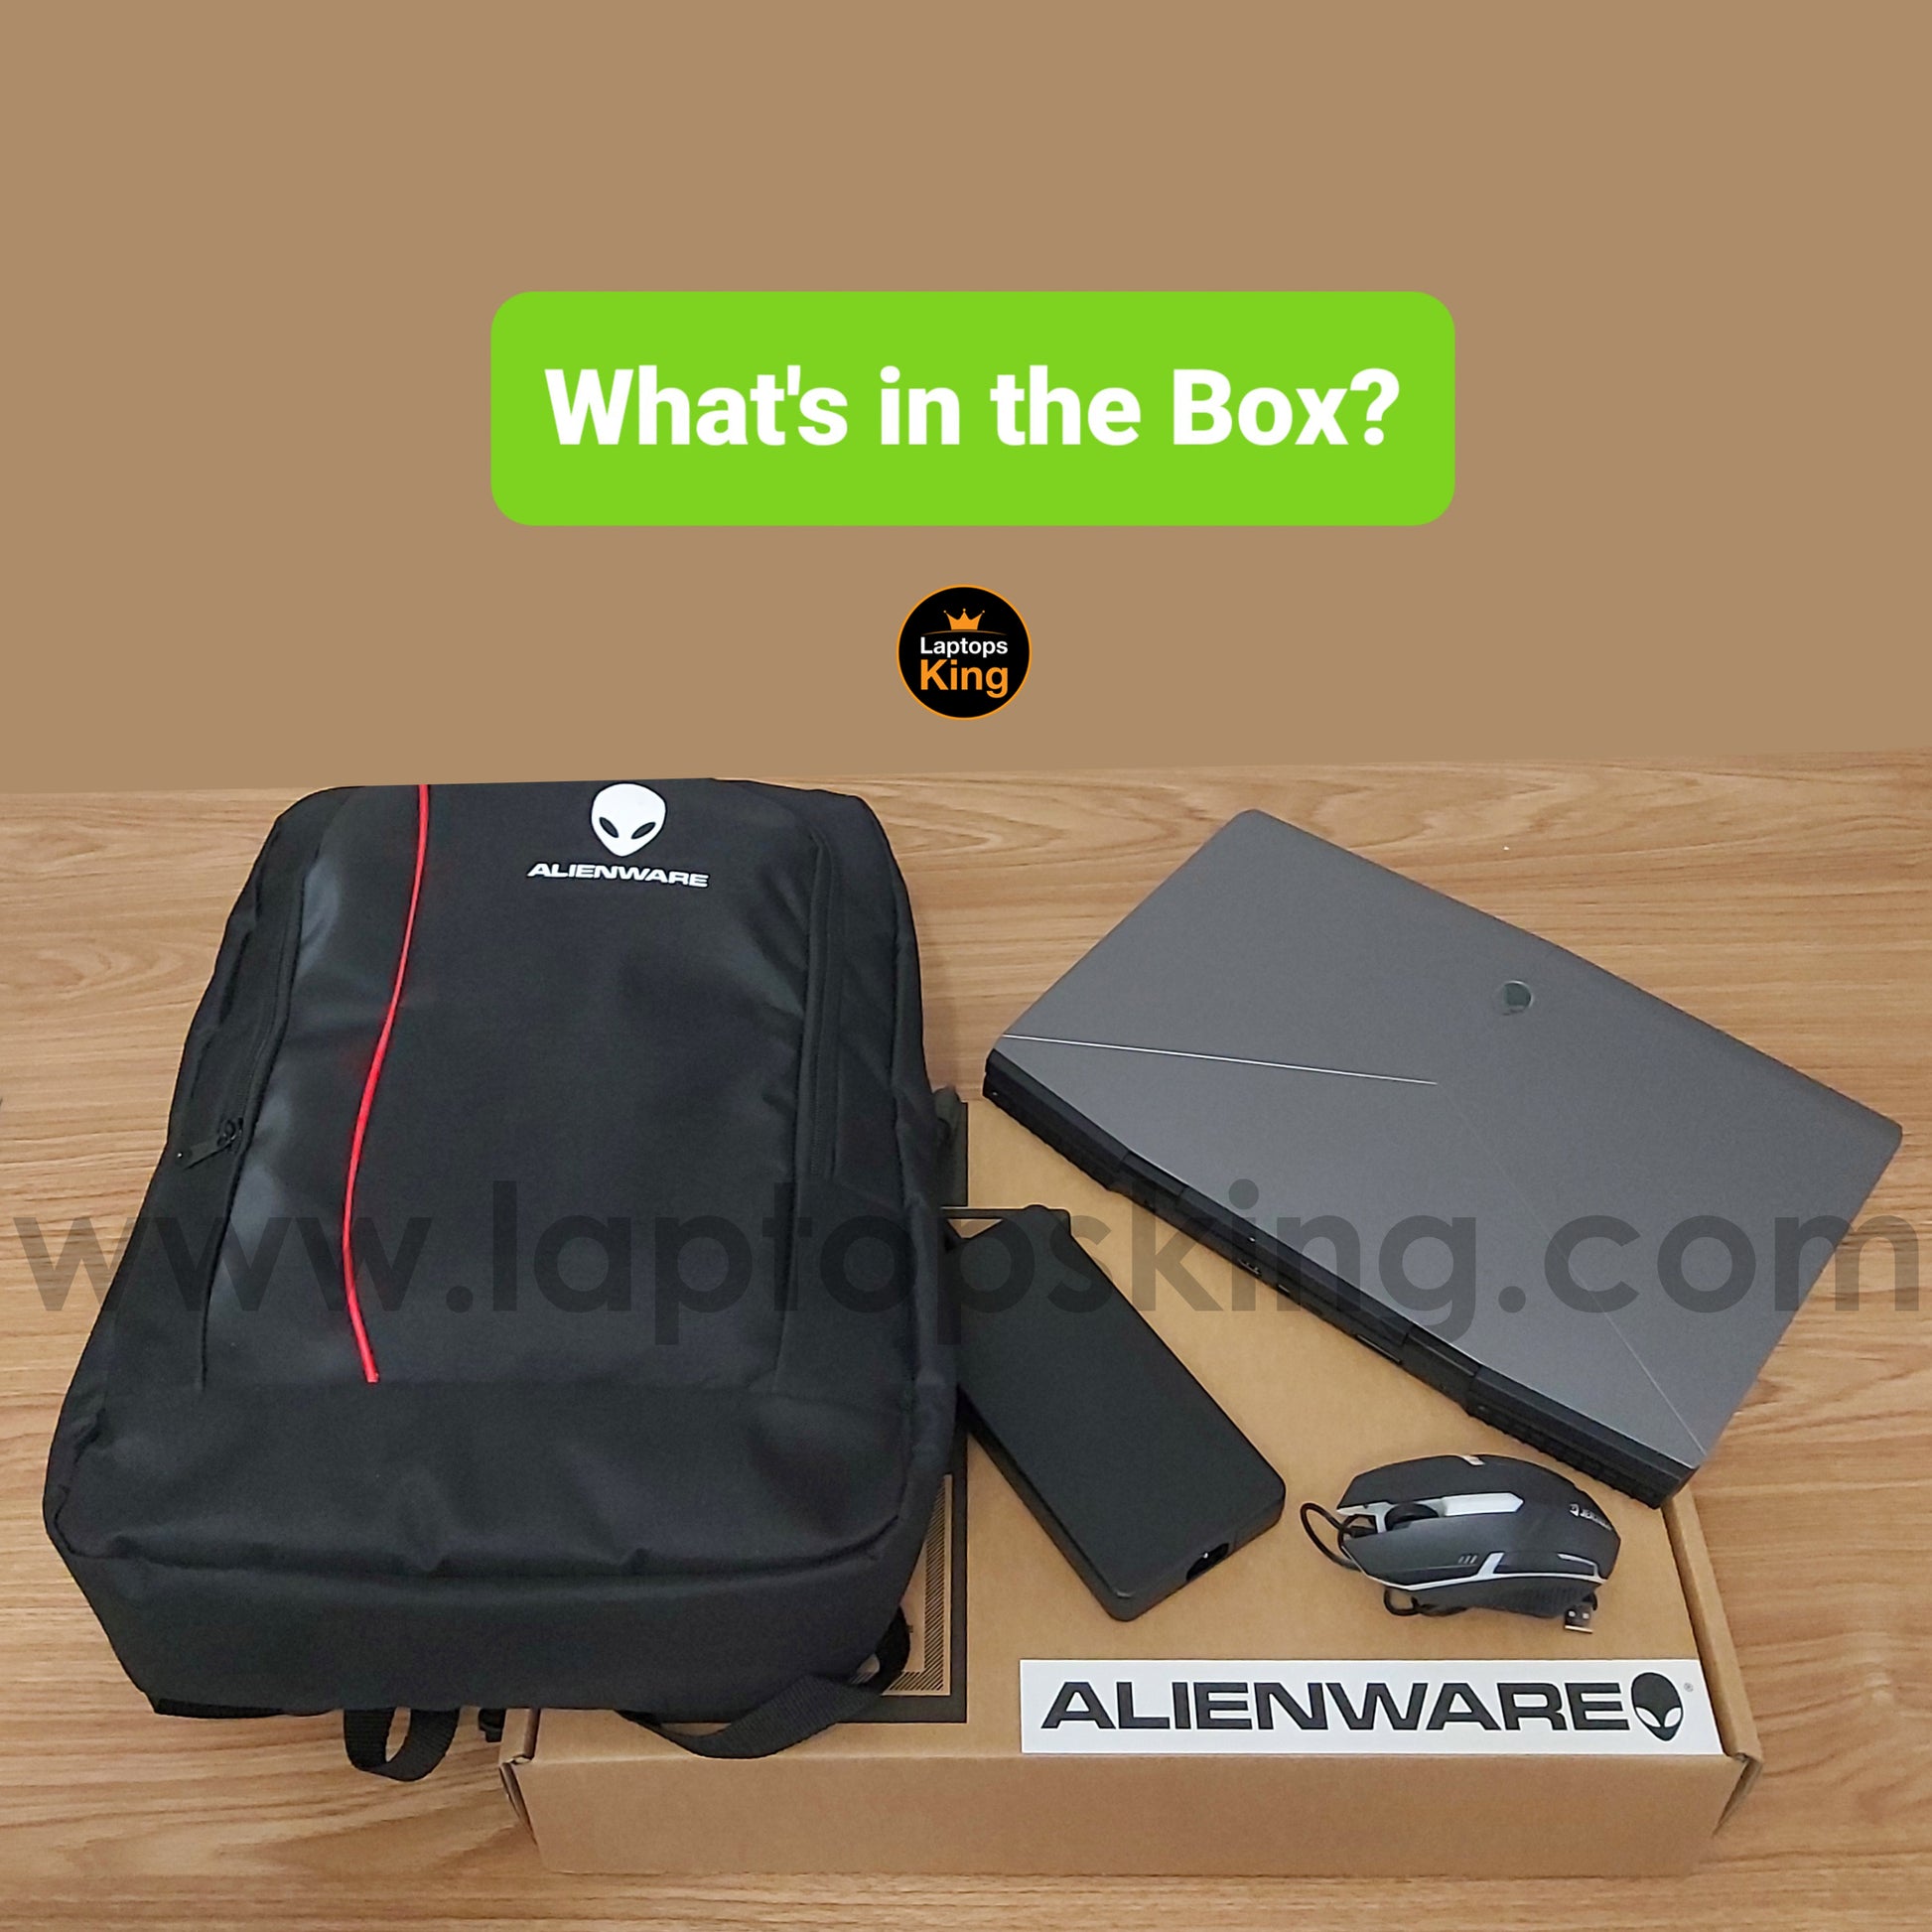 Alienware M17 Rtx 2080 i7-8750h Gaming Laptop (New Open Box) Gaming laptop, Graphic Design laptop, best laptop for gaming, Best laptop for graphic design, computer for sale Lebanon, laptop for video editing in Lebanon, laptop for sale Lebanon, Best graphic design laptop,	Best video editing laptop, Best programming laptop, laptop for sale in Lebanon, laptops for sale in Lebanon, laptop for sale in Lebanon, buy computer Lebanon, buy laptop Lebanon.